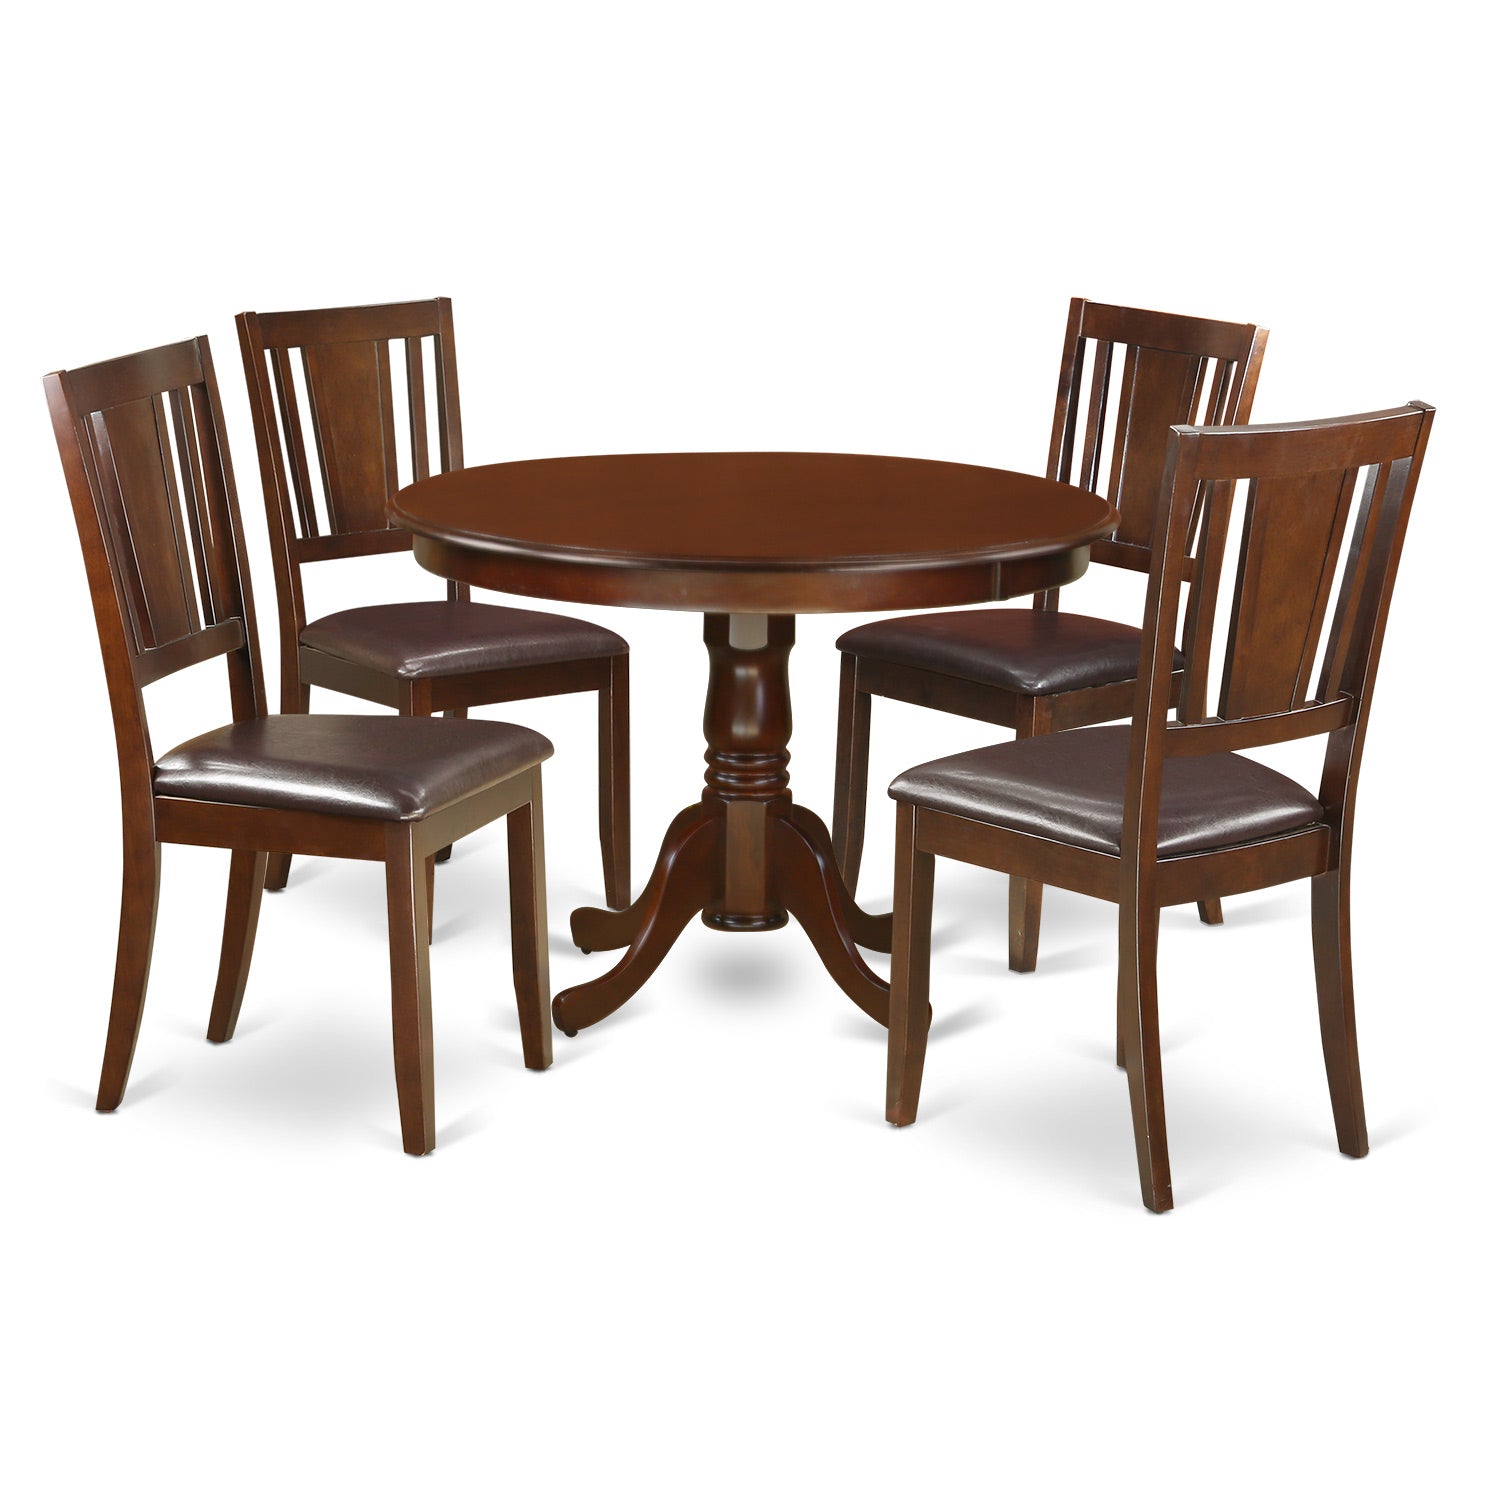 HLDU5-MAH-LC 5 Pc set with a Round Dinette Table and 4 Leather Kitchen Chairs in Mahogany